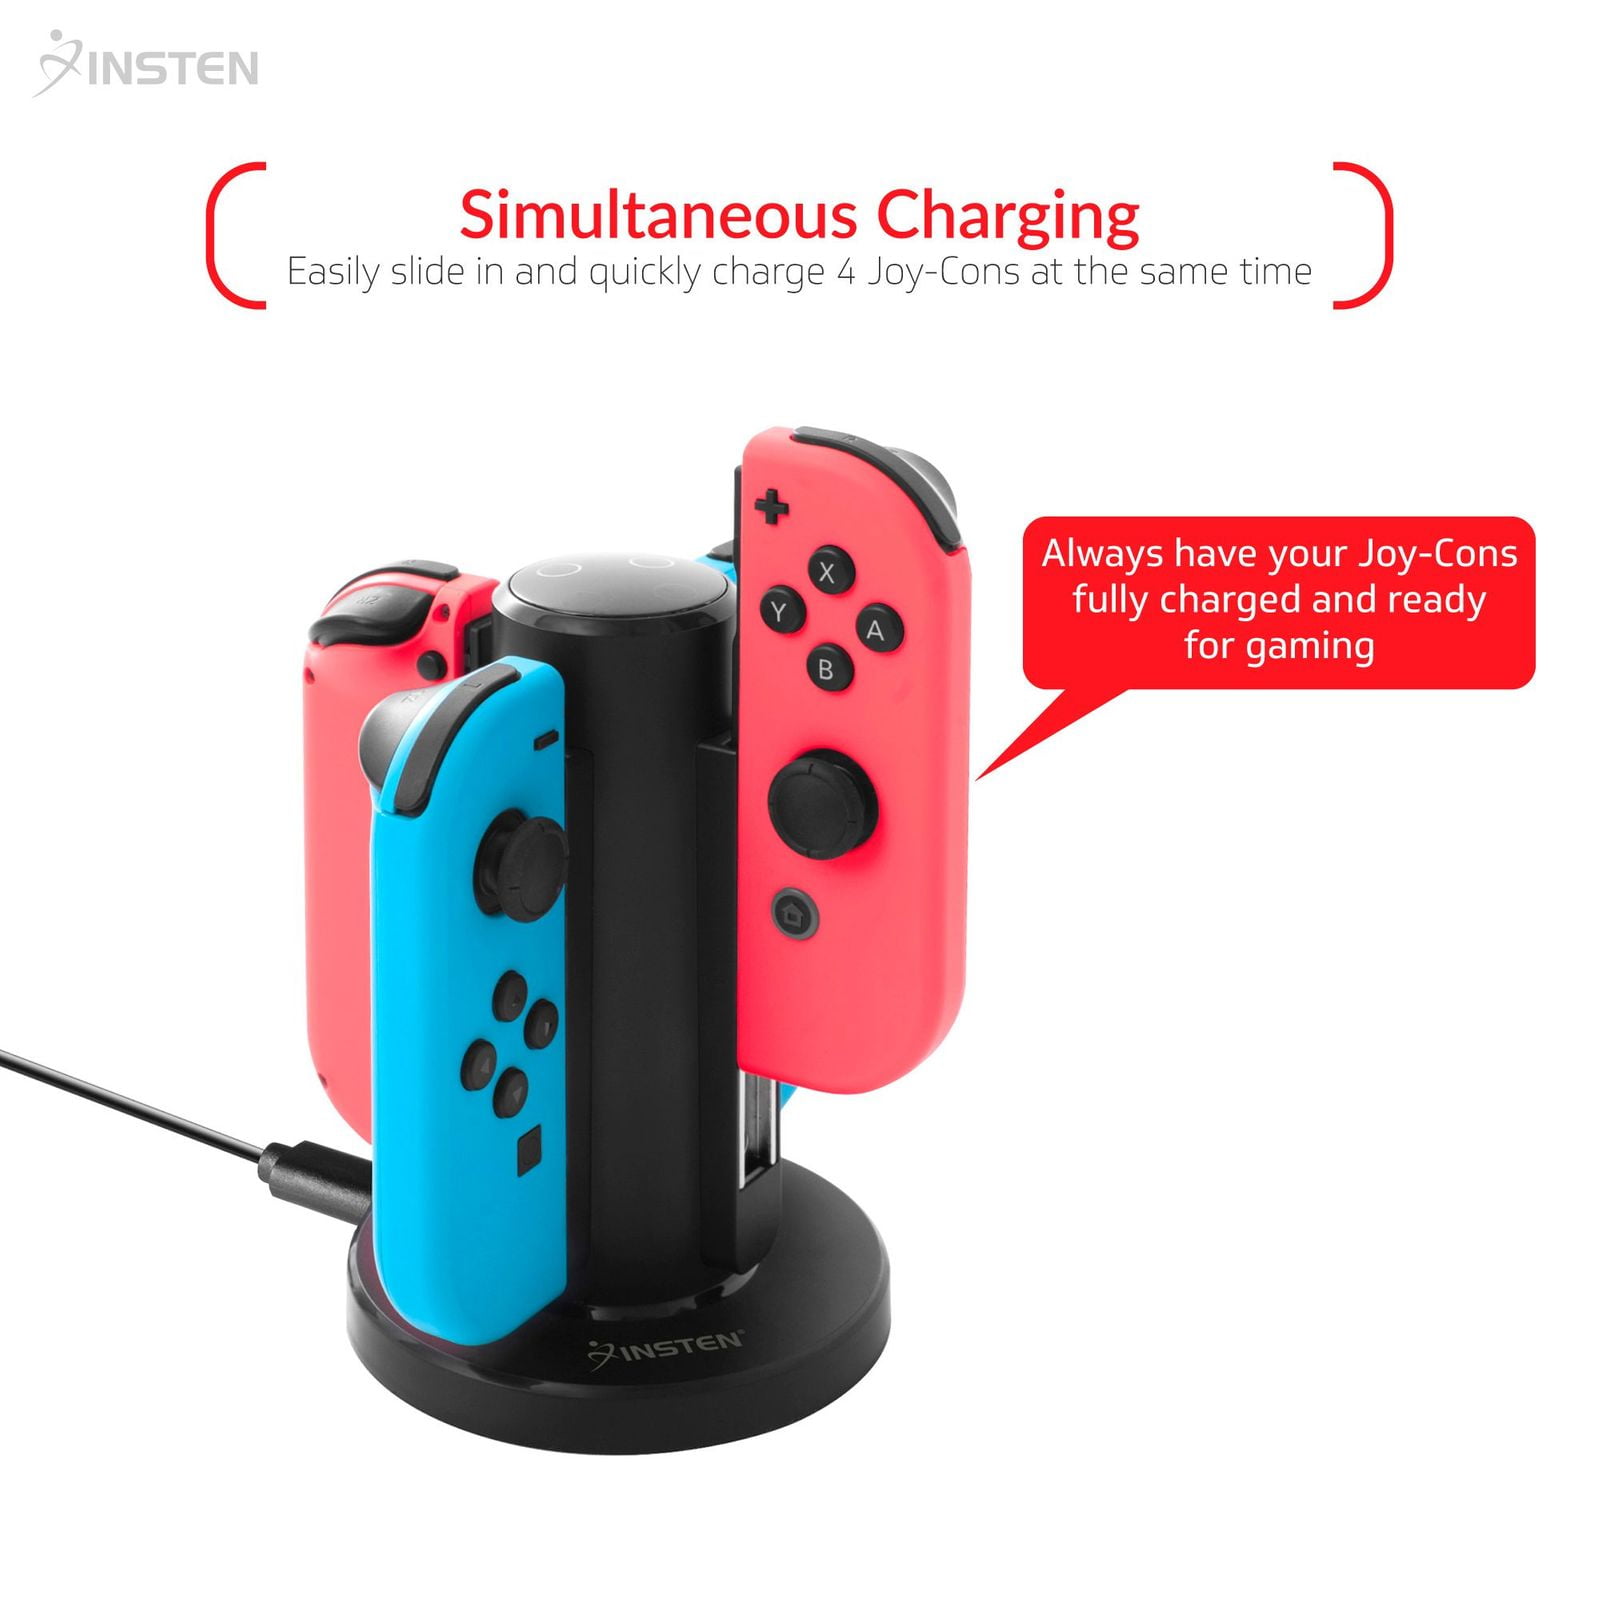 Døds kæbe klæde sig ud Kirurgi Insten 4 in 1 Joy Con Controller Charger Docking Stand For Nintendo Switch  and OLED Model Charging Dock Joycon with LED indication & USB Cable -  Walmart.com